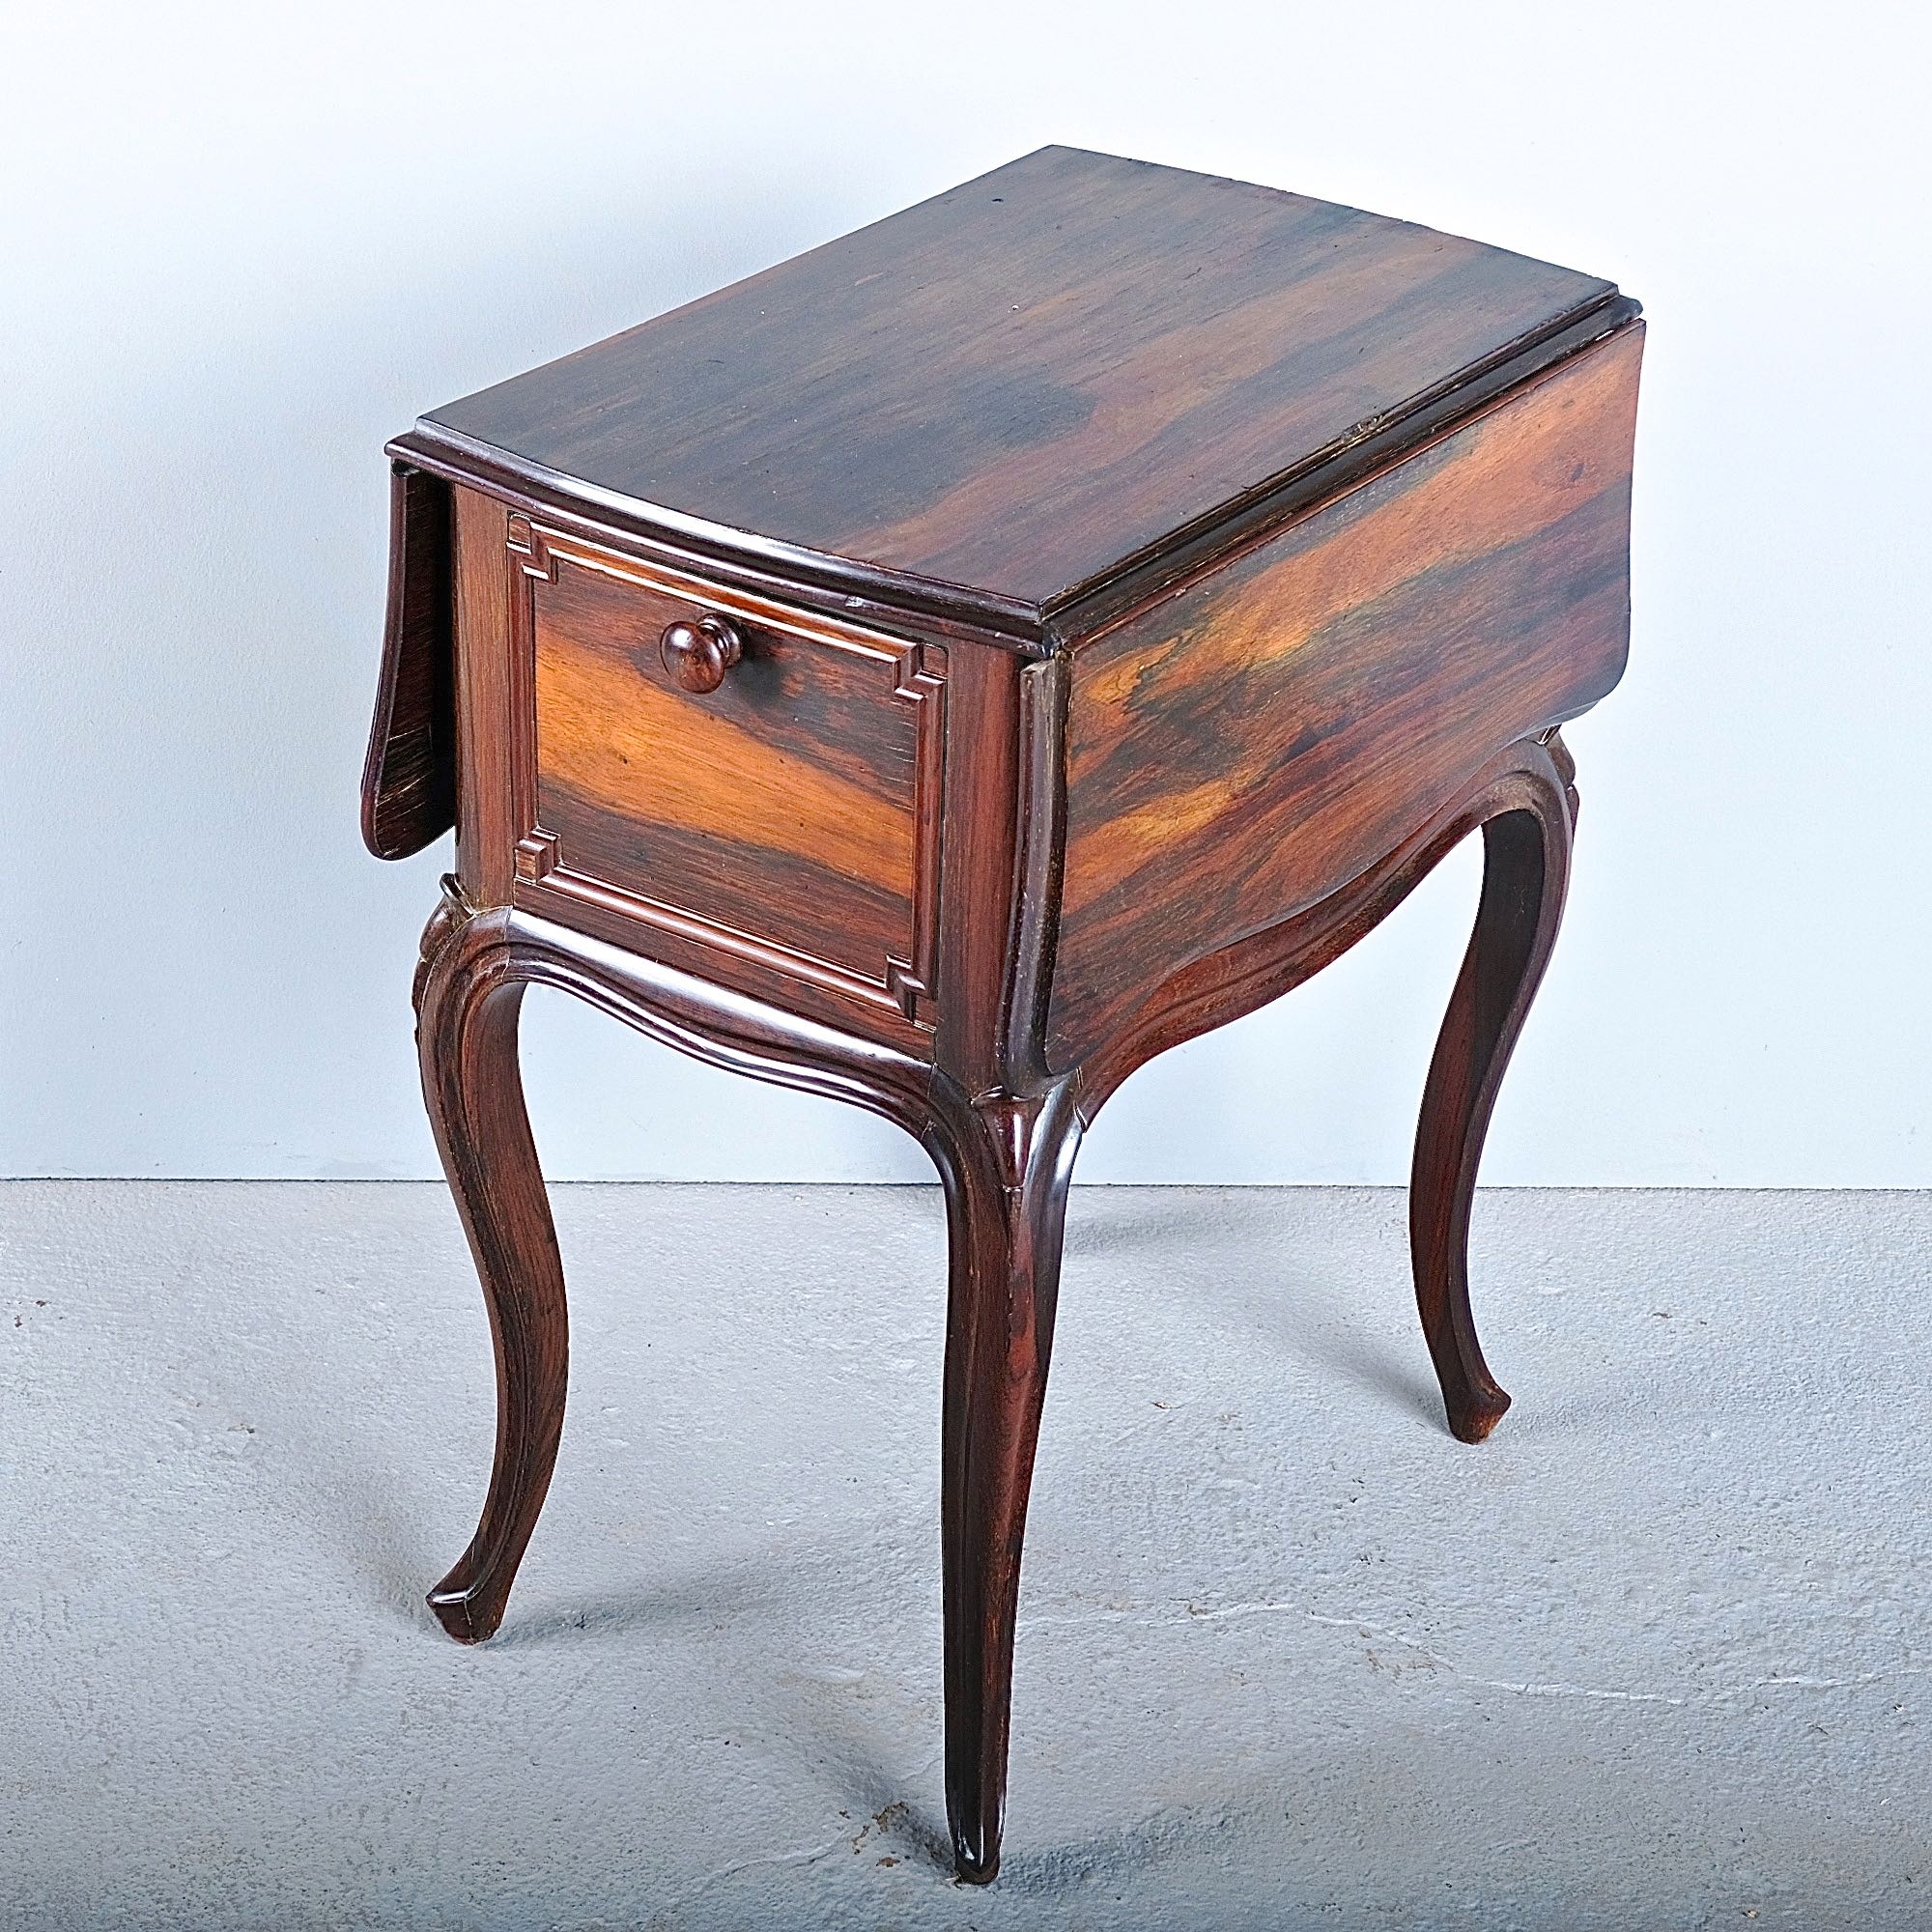 Antique twodrawer drop leaf accent table with cabriole legs, rosewood